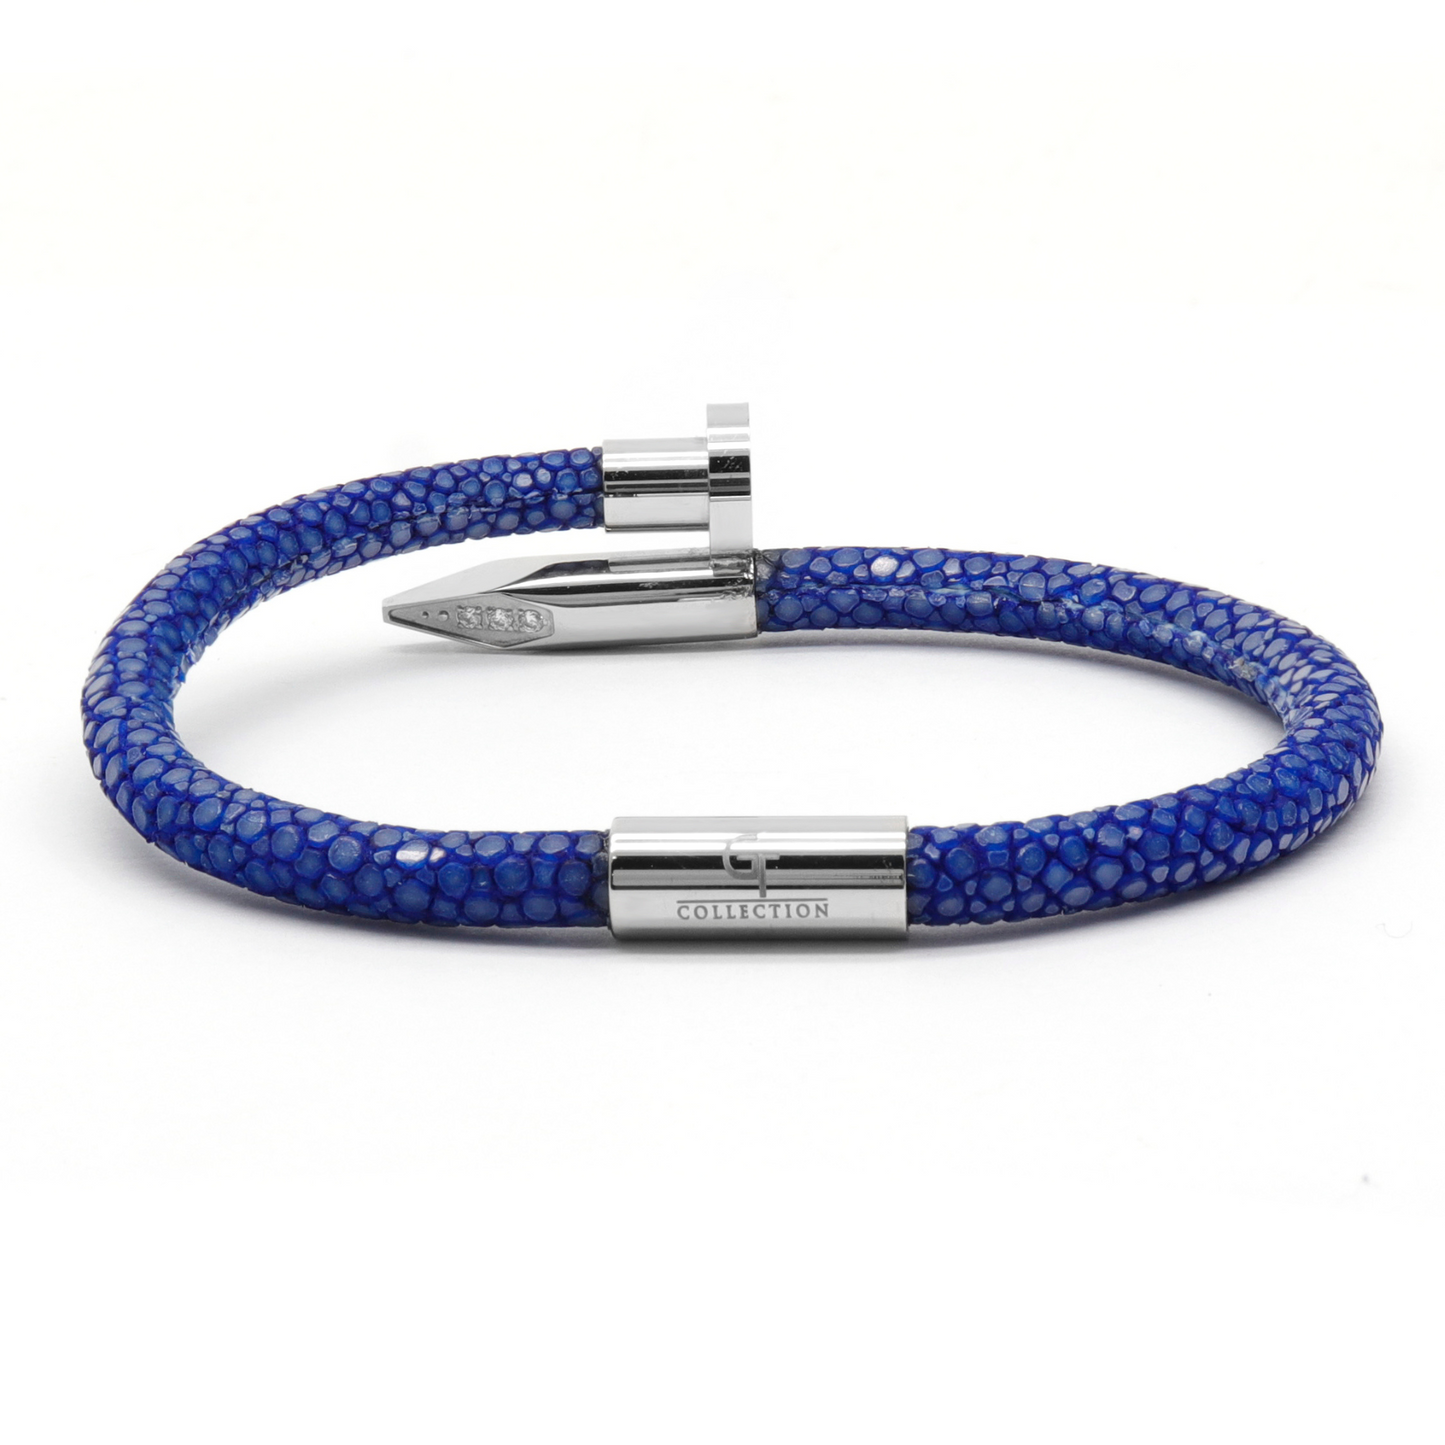 Bracelet - Blue Leather with Silver Nail and Zircon Diamond